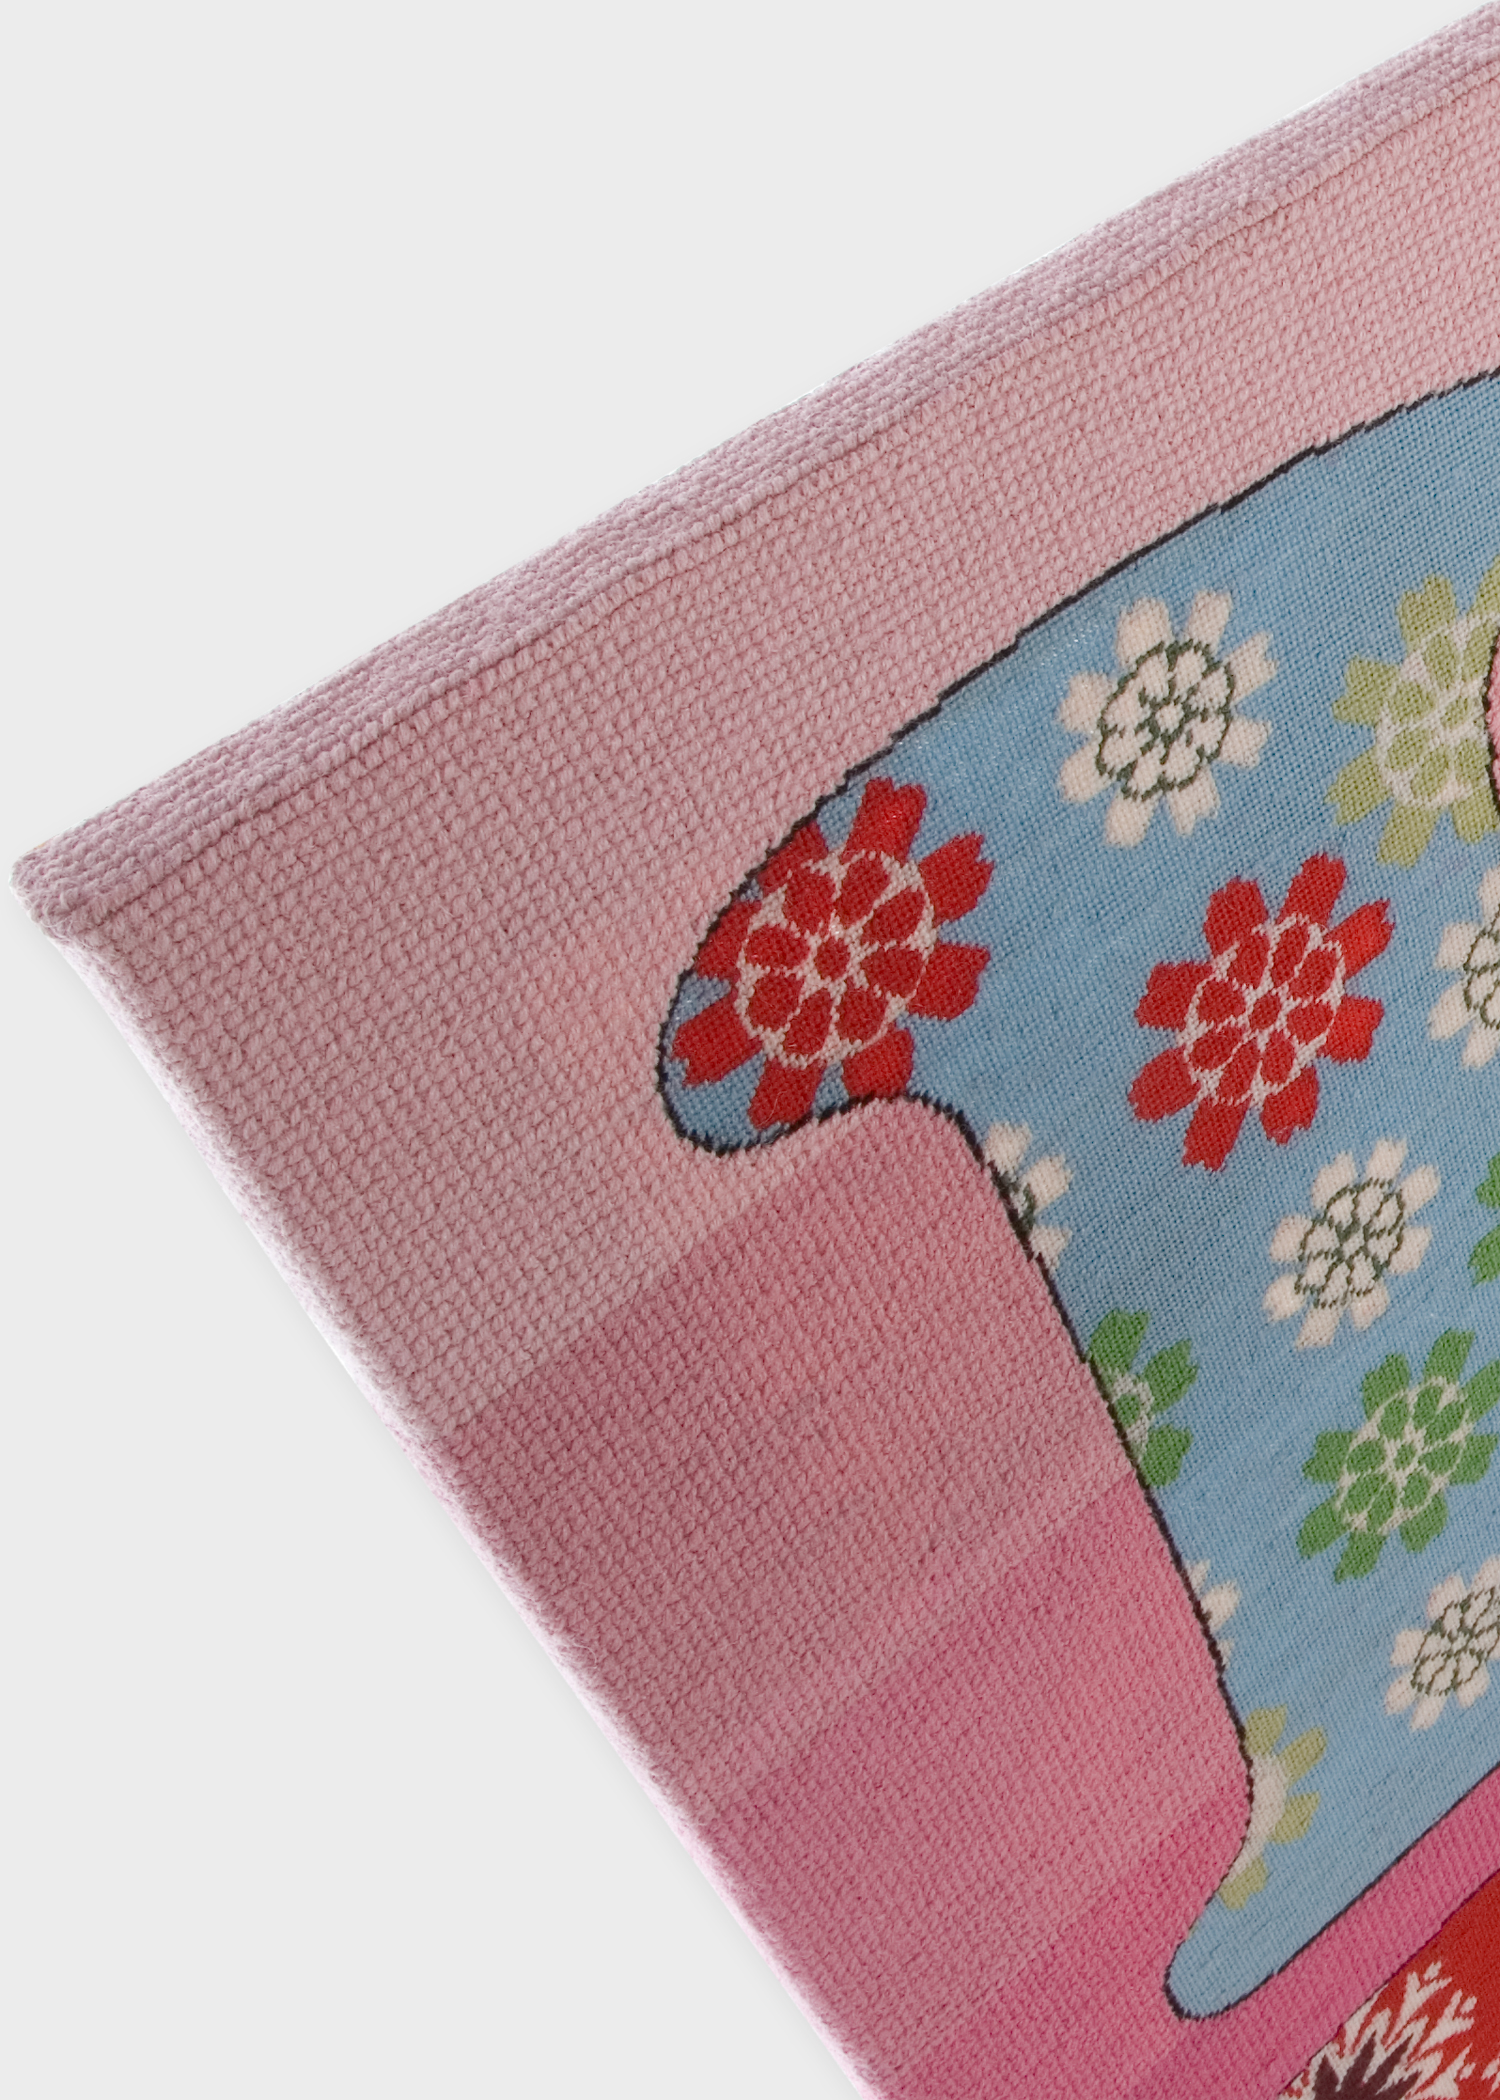 Detail view - Paul Smith for The Rug Company - Pink Love Needlepoint Wallhanging